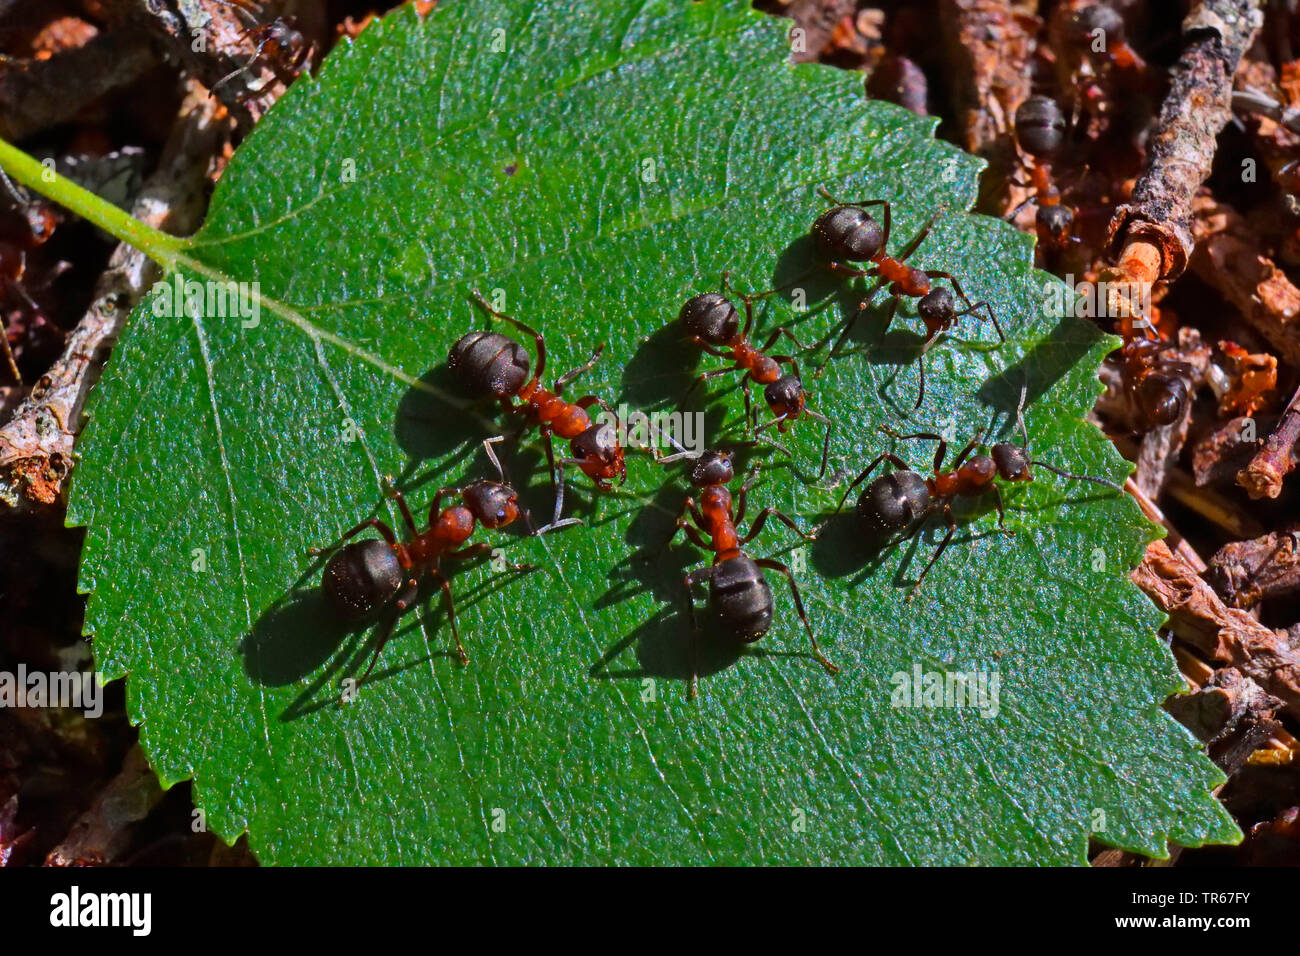 wood ant (Formica aquilonia), group on a leaf, United Kingdom, Scotland, Cairngorms National Park Stock Photo